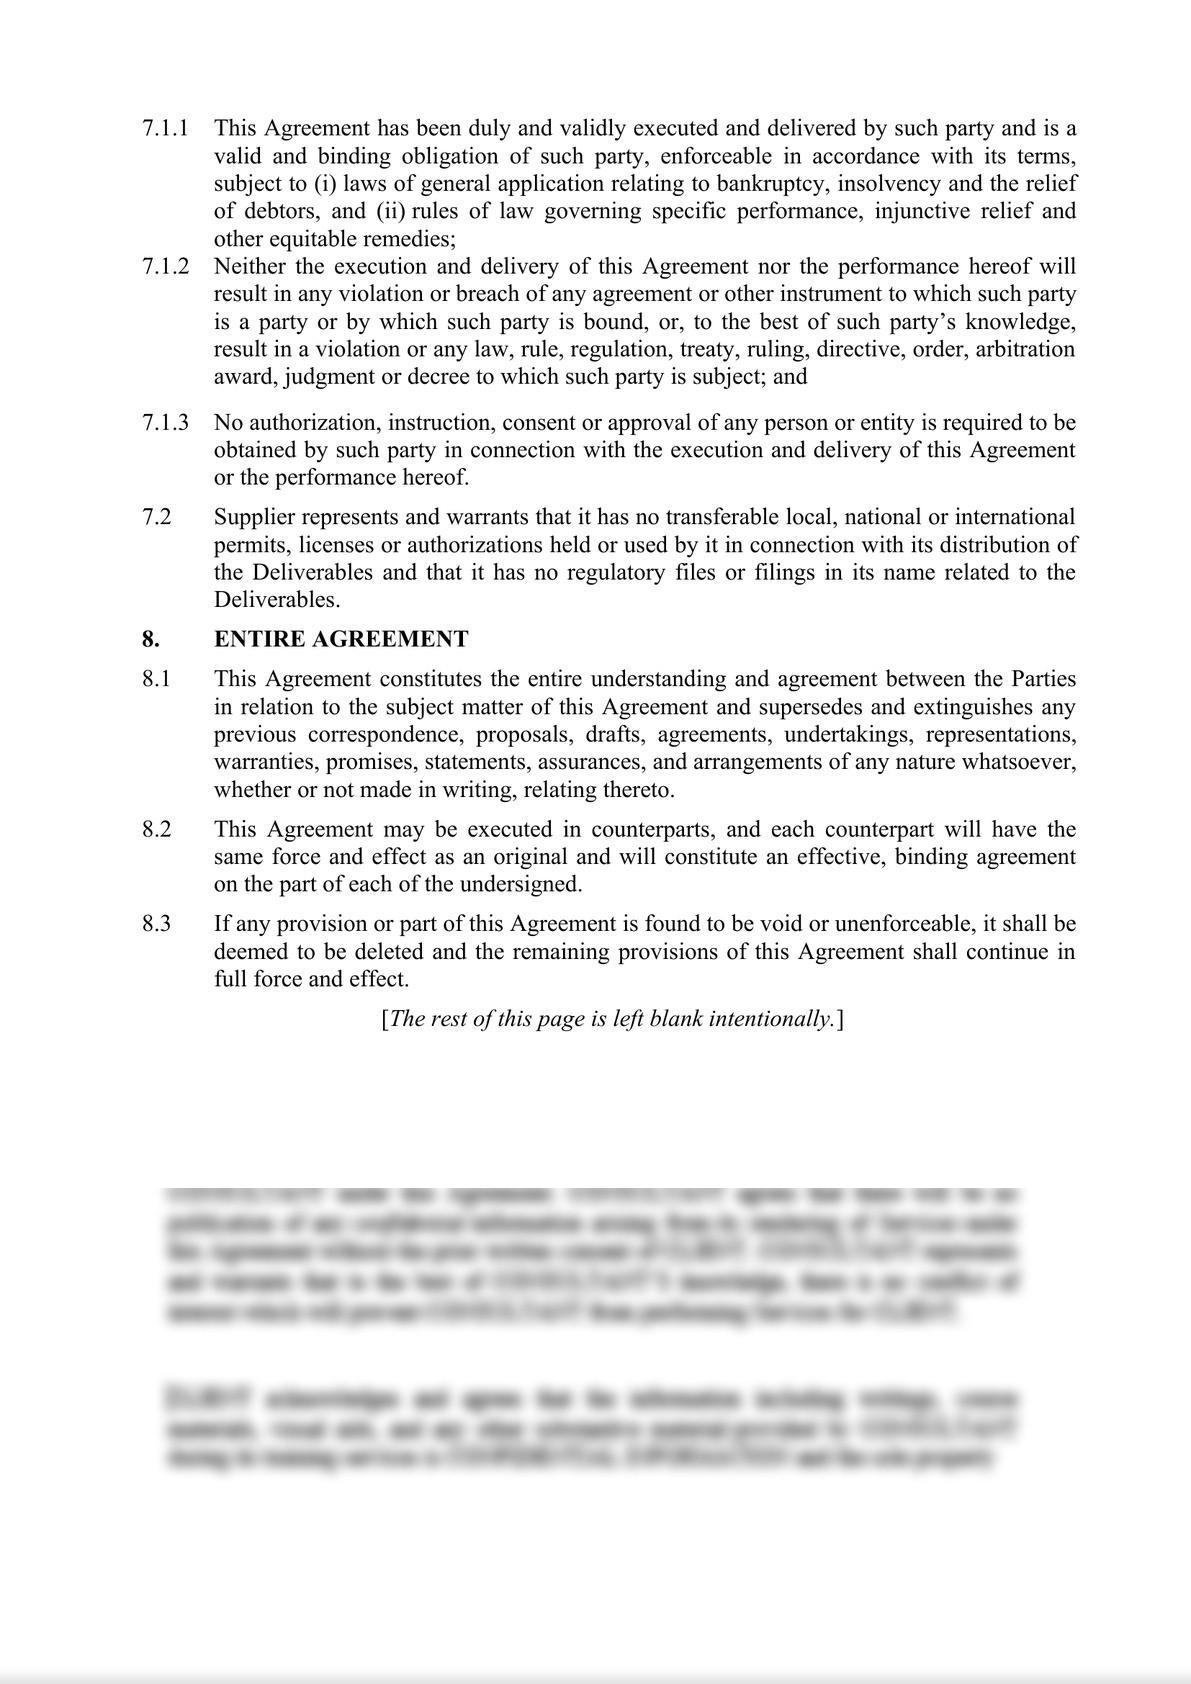 Termination and Settlement Agreement-2